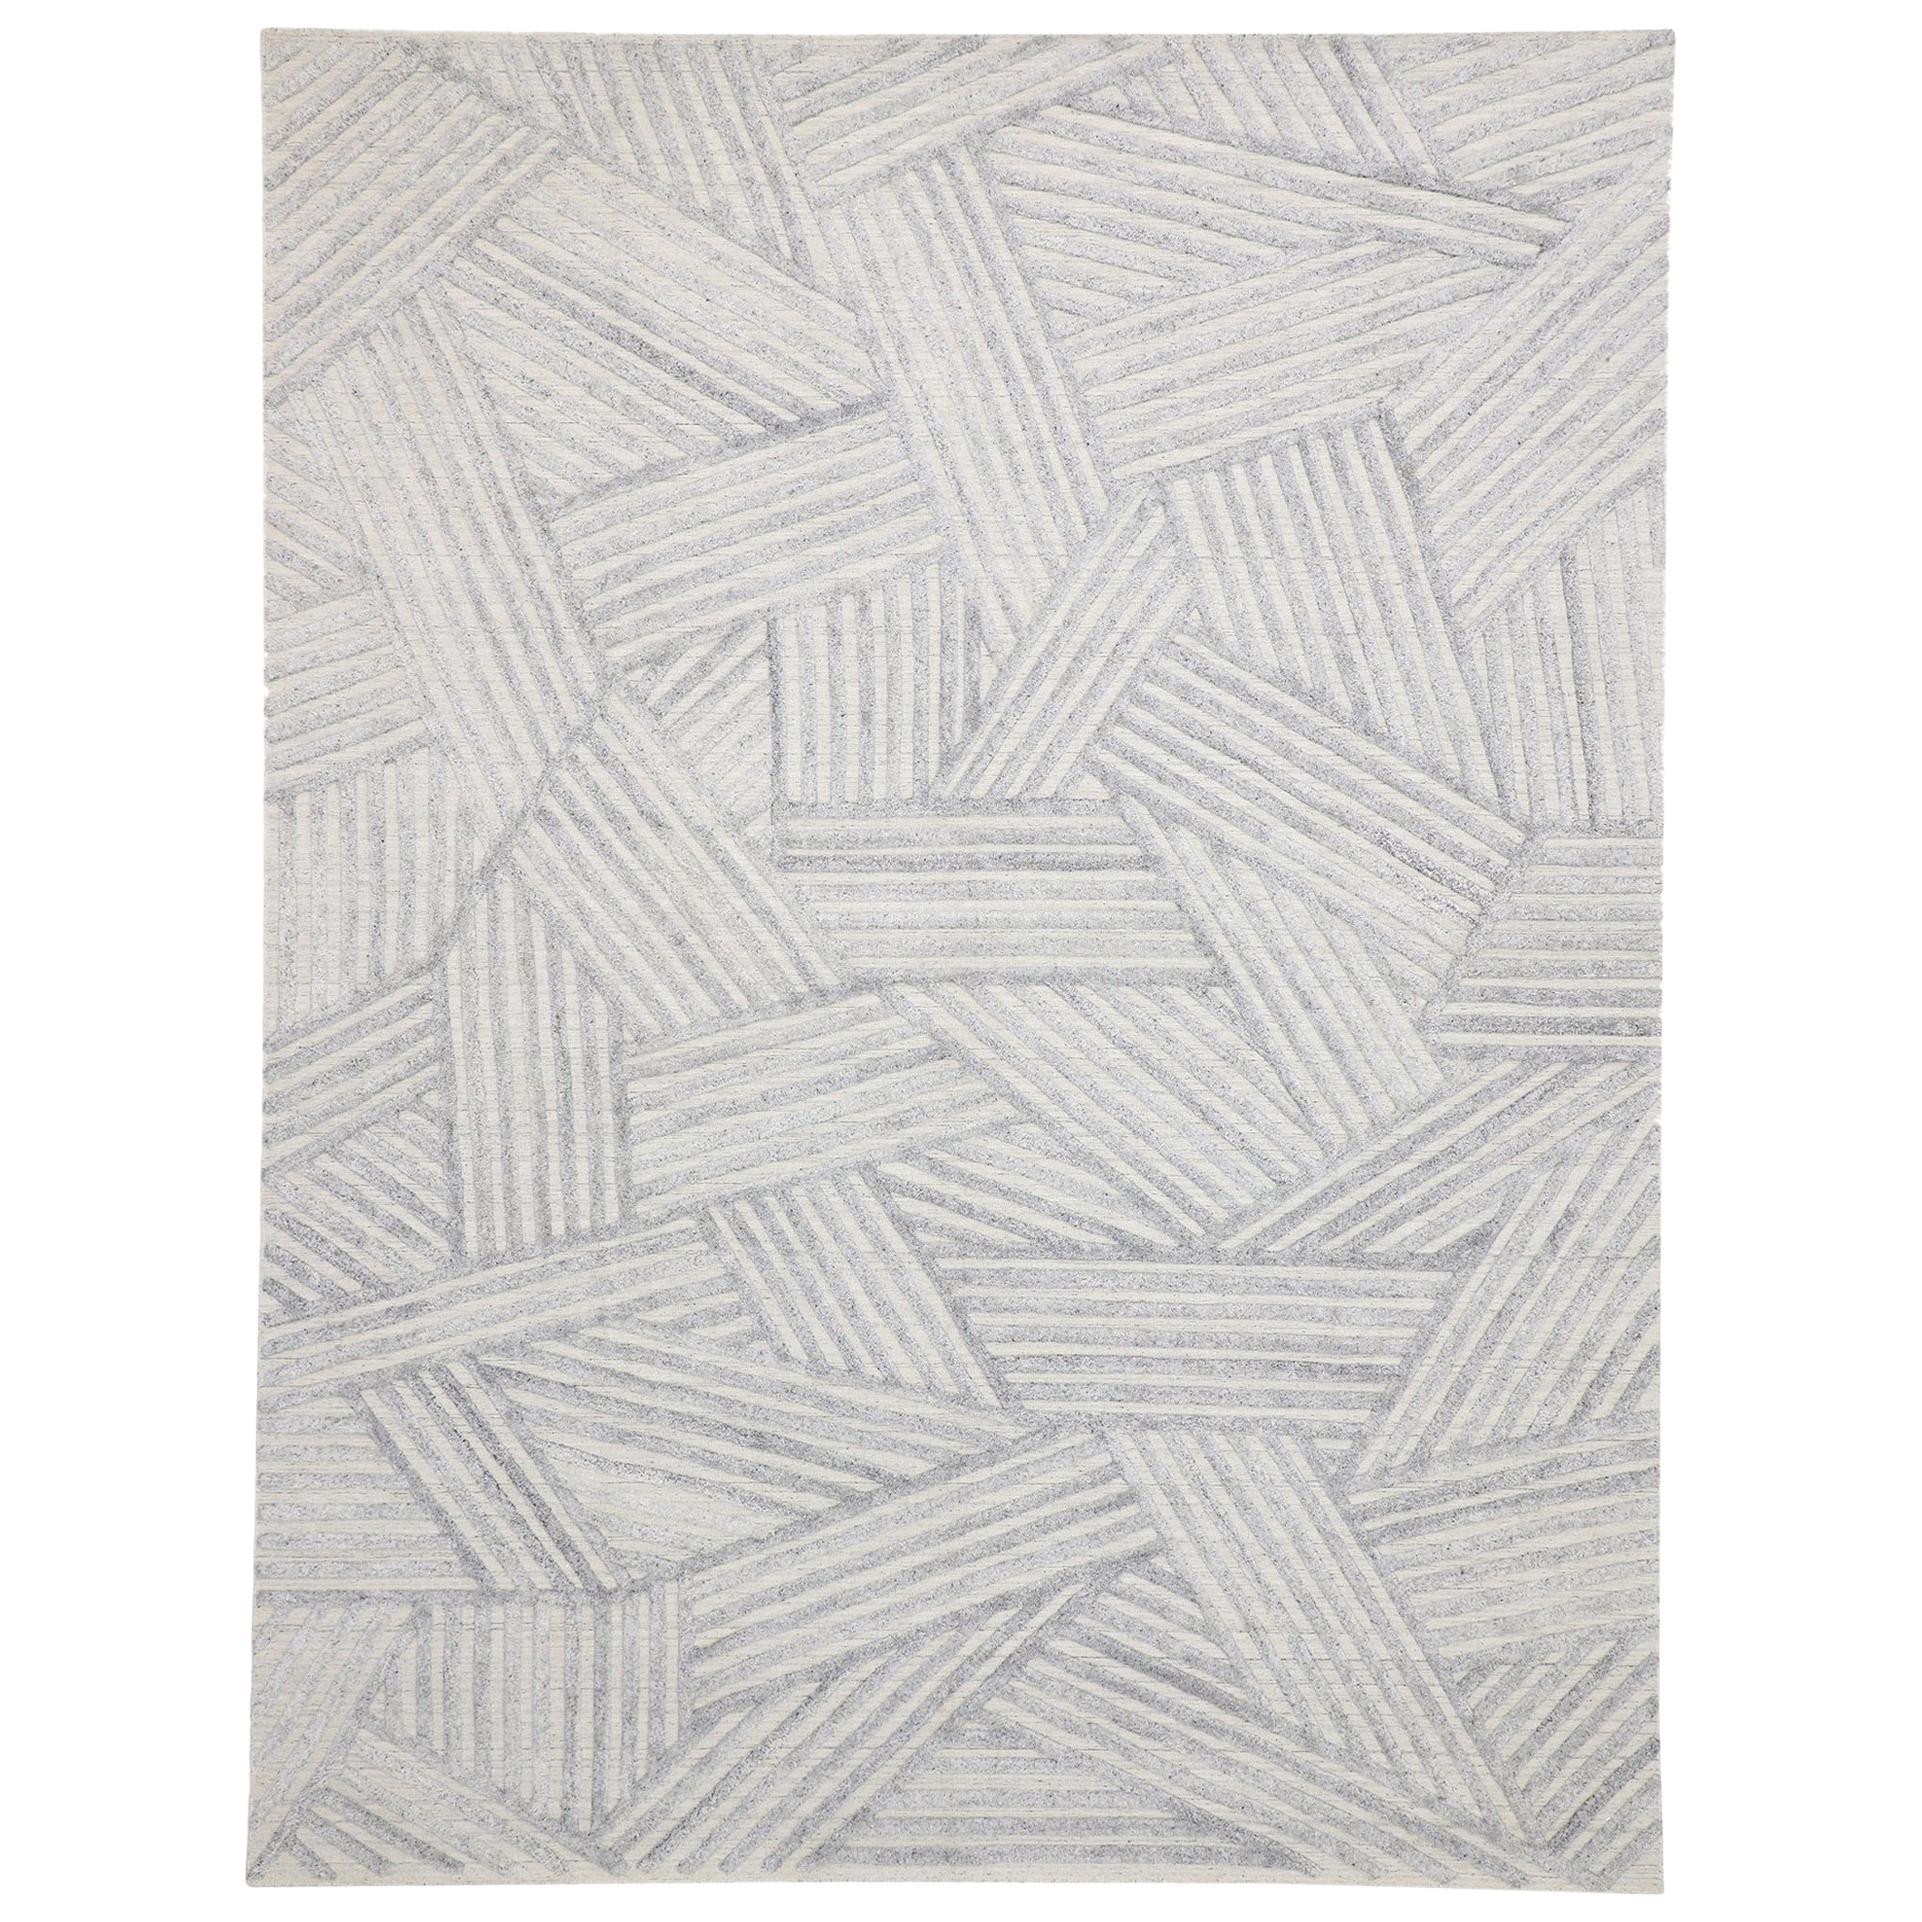 New Contemporary Gray Area Rug with Bauhaus Style, Texture Area Rug